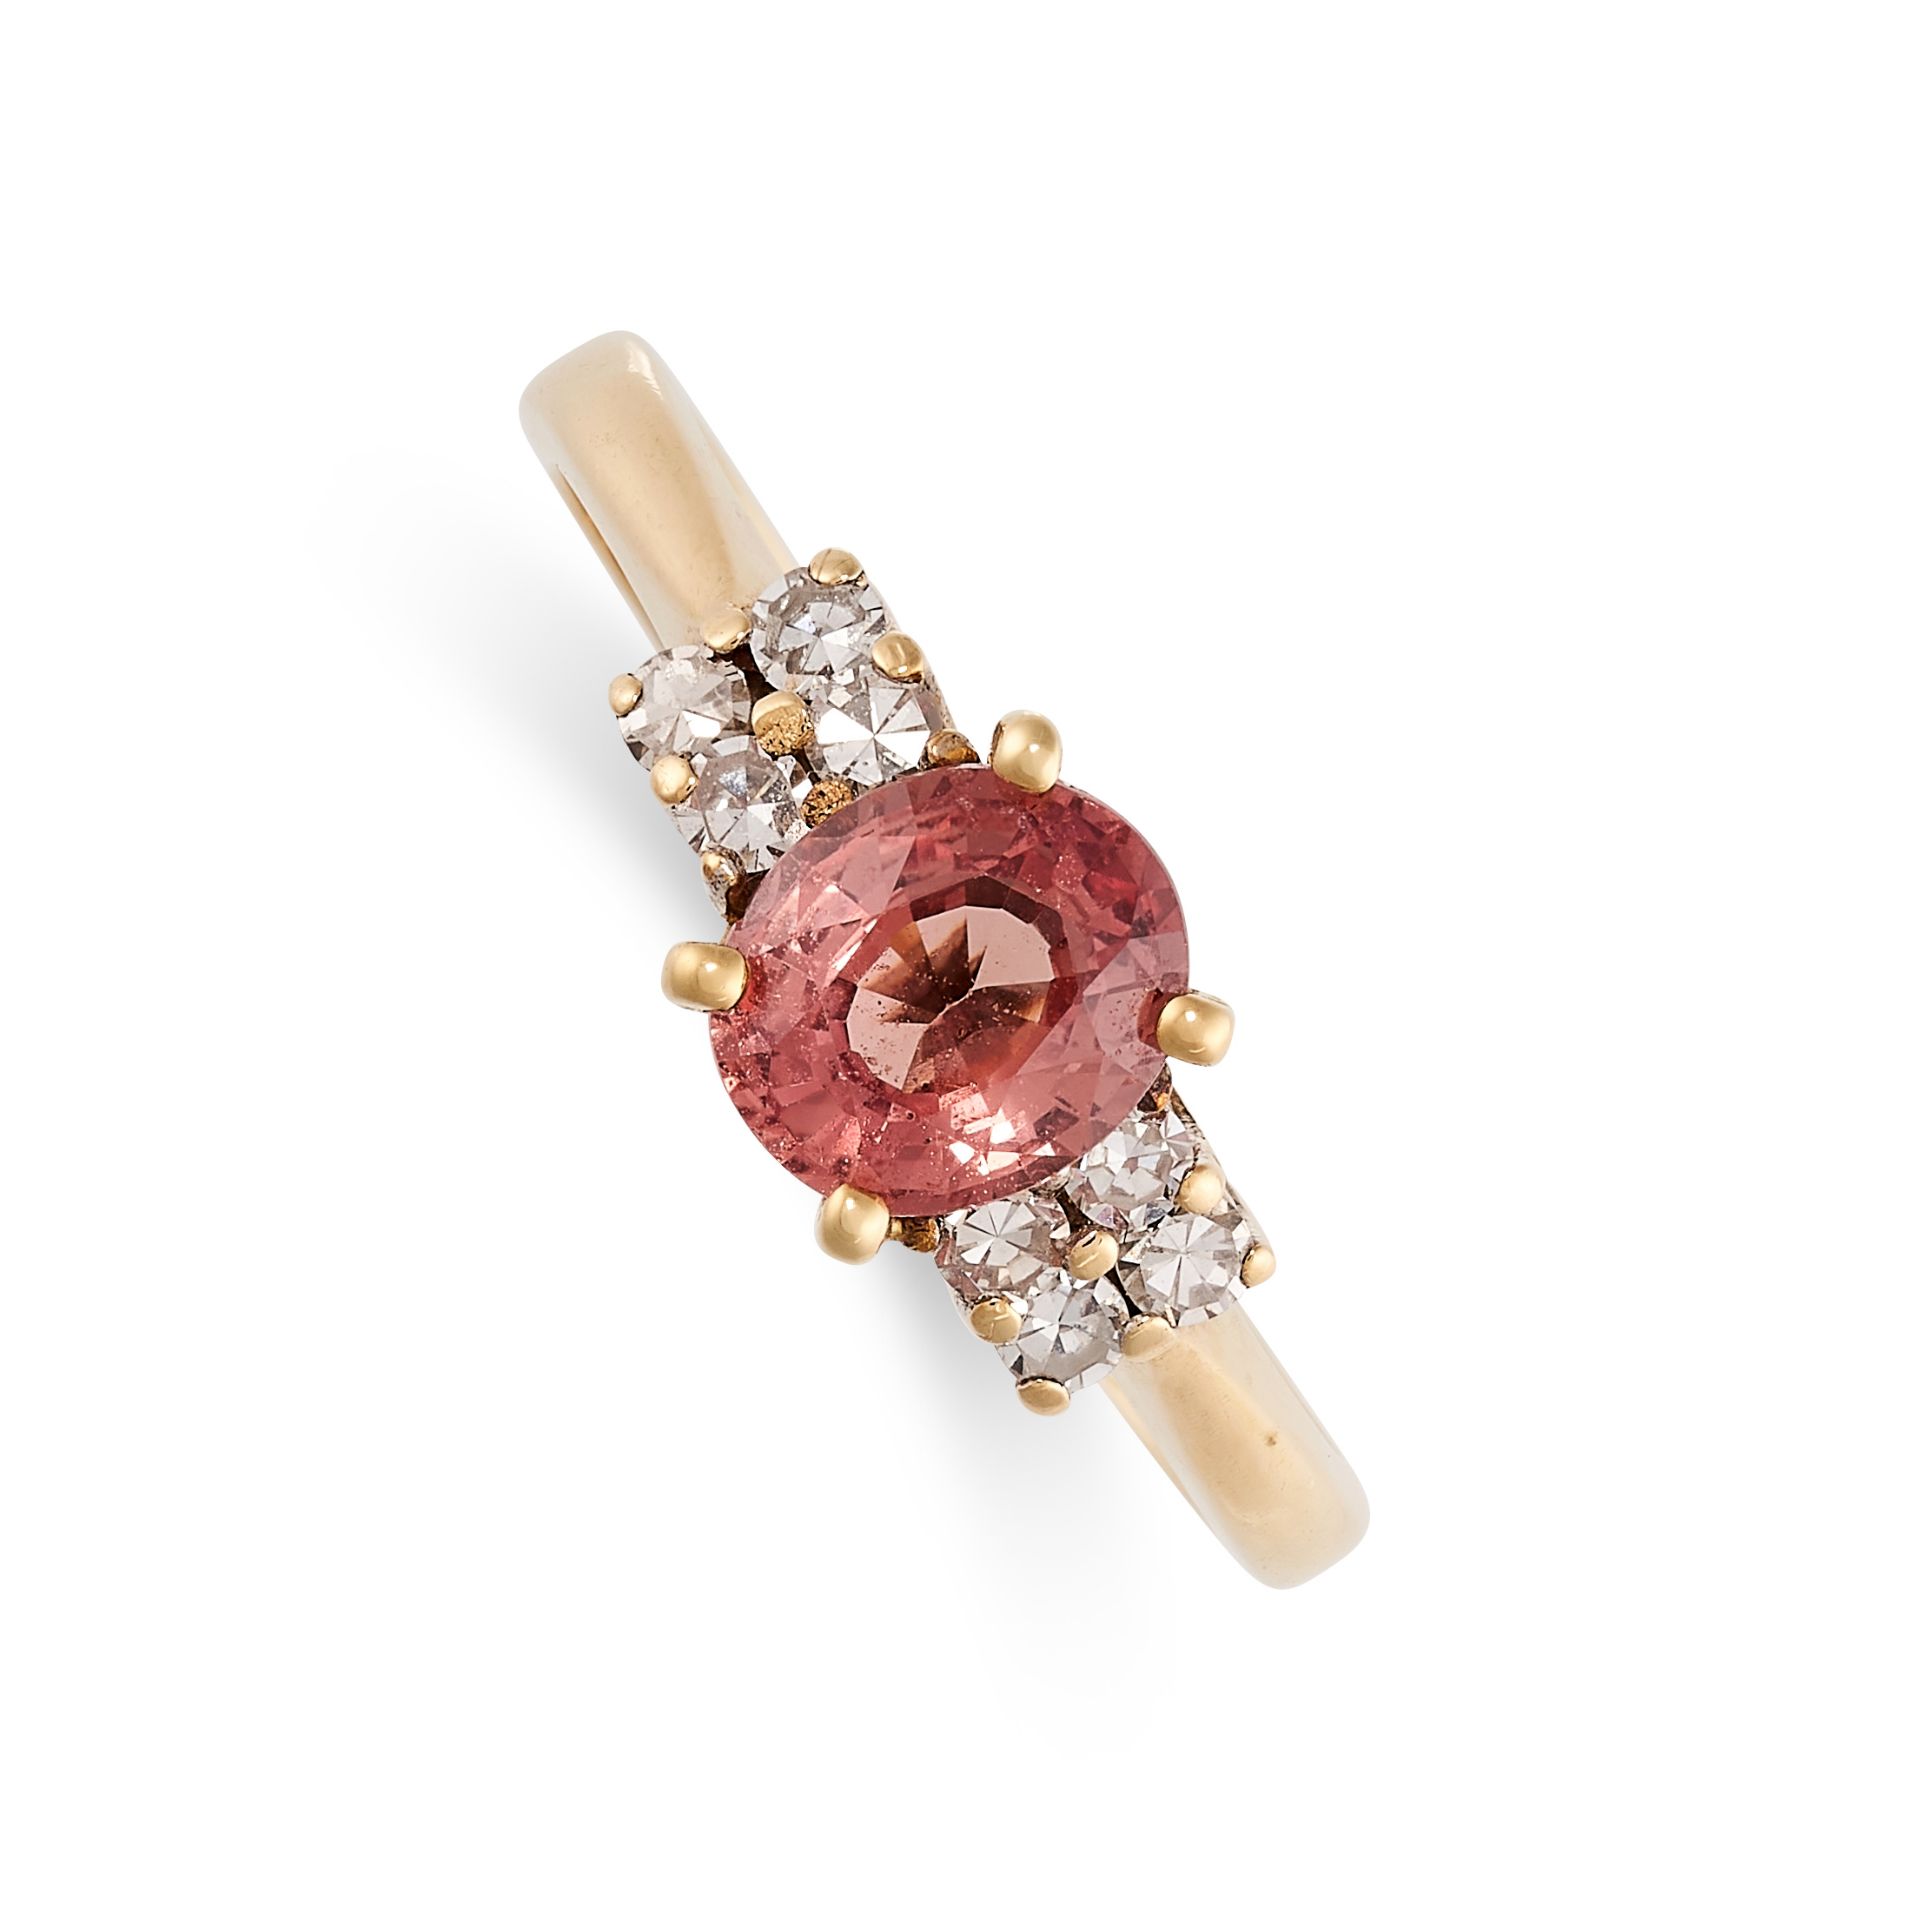 AN UNHEATED PADPARADSCHA SAPPHIRE AND DIAMOND RING in 18ct yellow gold, set with an oval cut